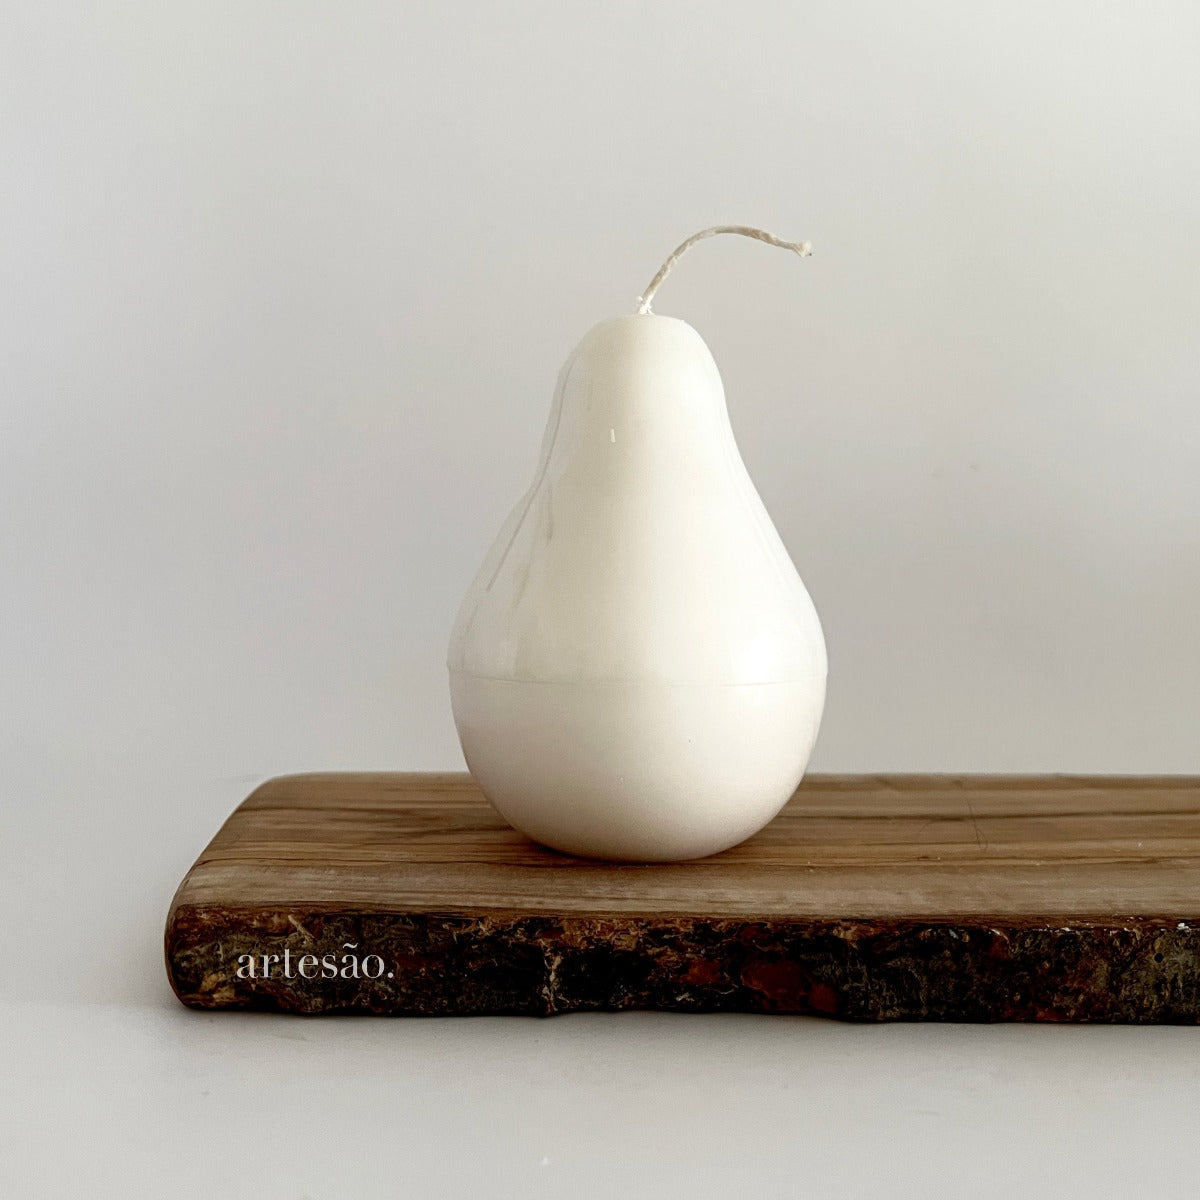 Artesao Luxury Candle. Pear Sculptural candle. Handmade in Sydney Australia. 